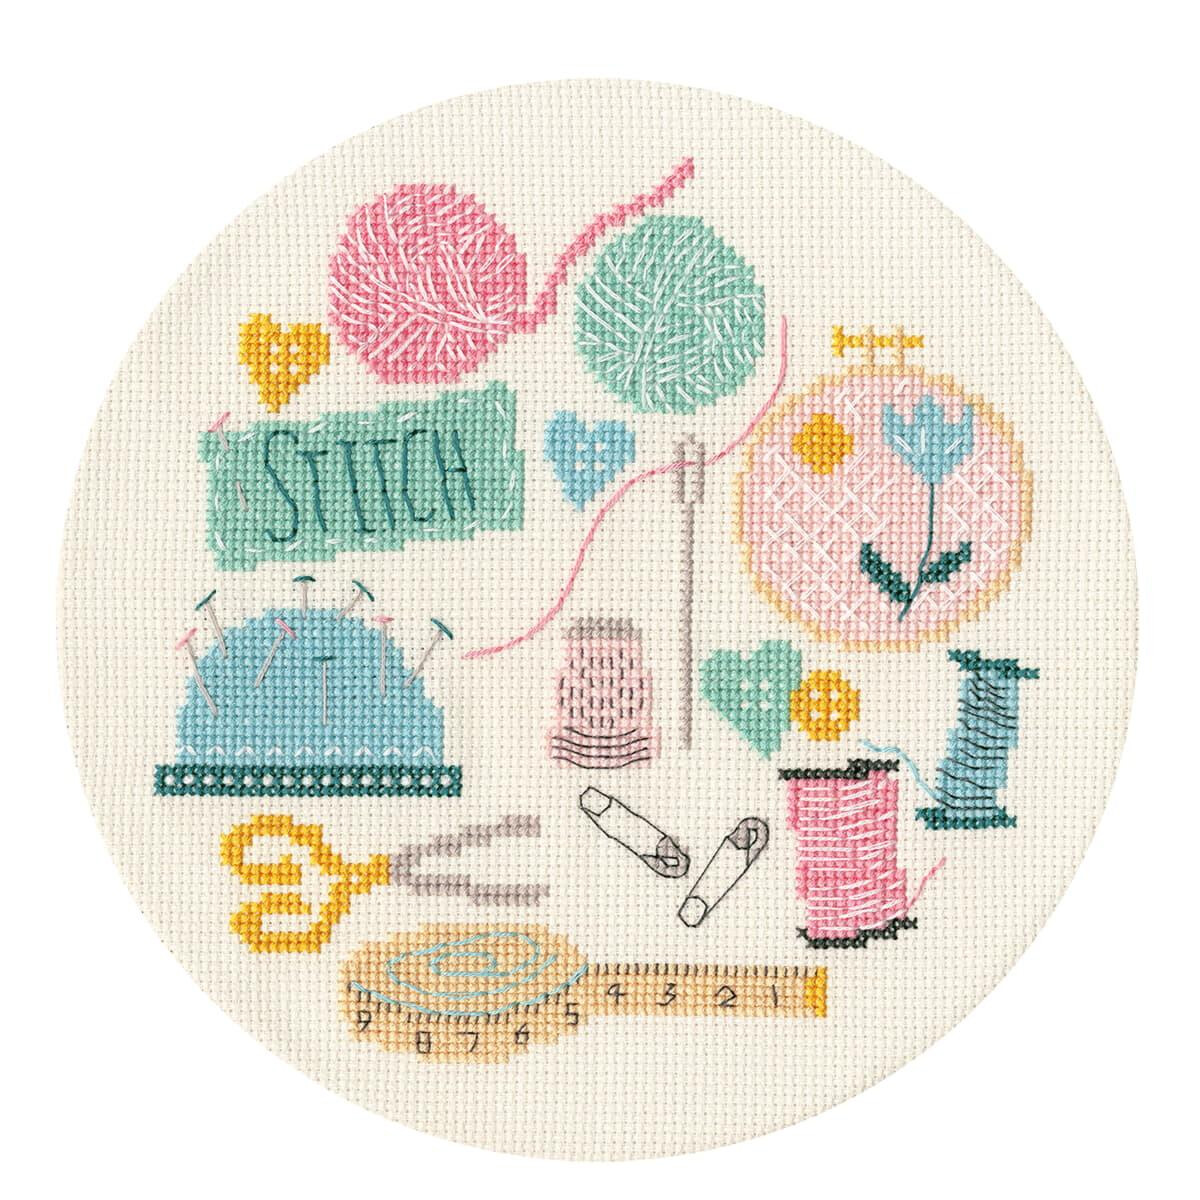 A circular embroidery design, reminiscent of a Bothy...